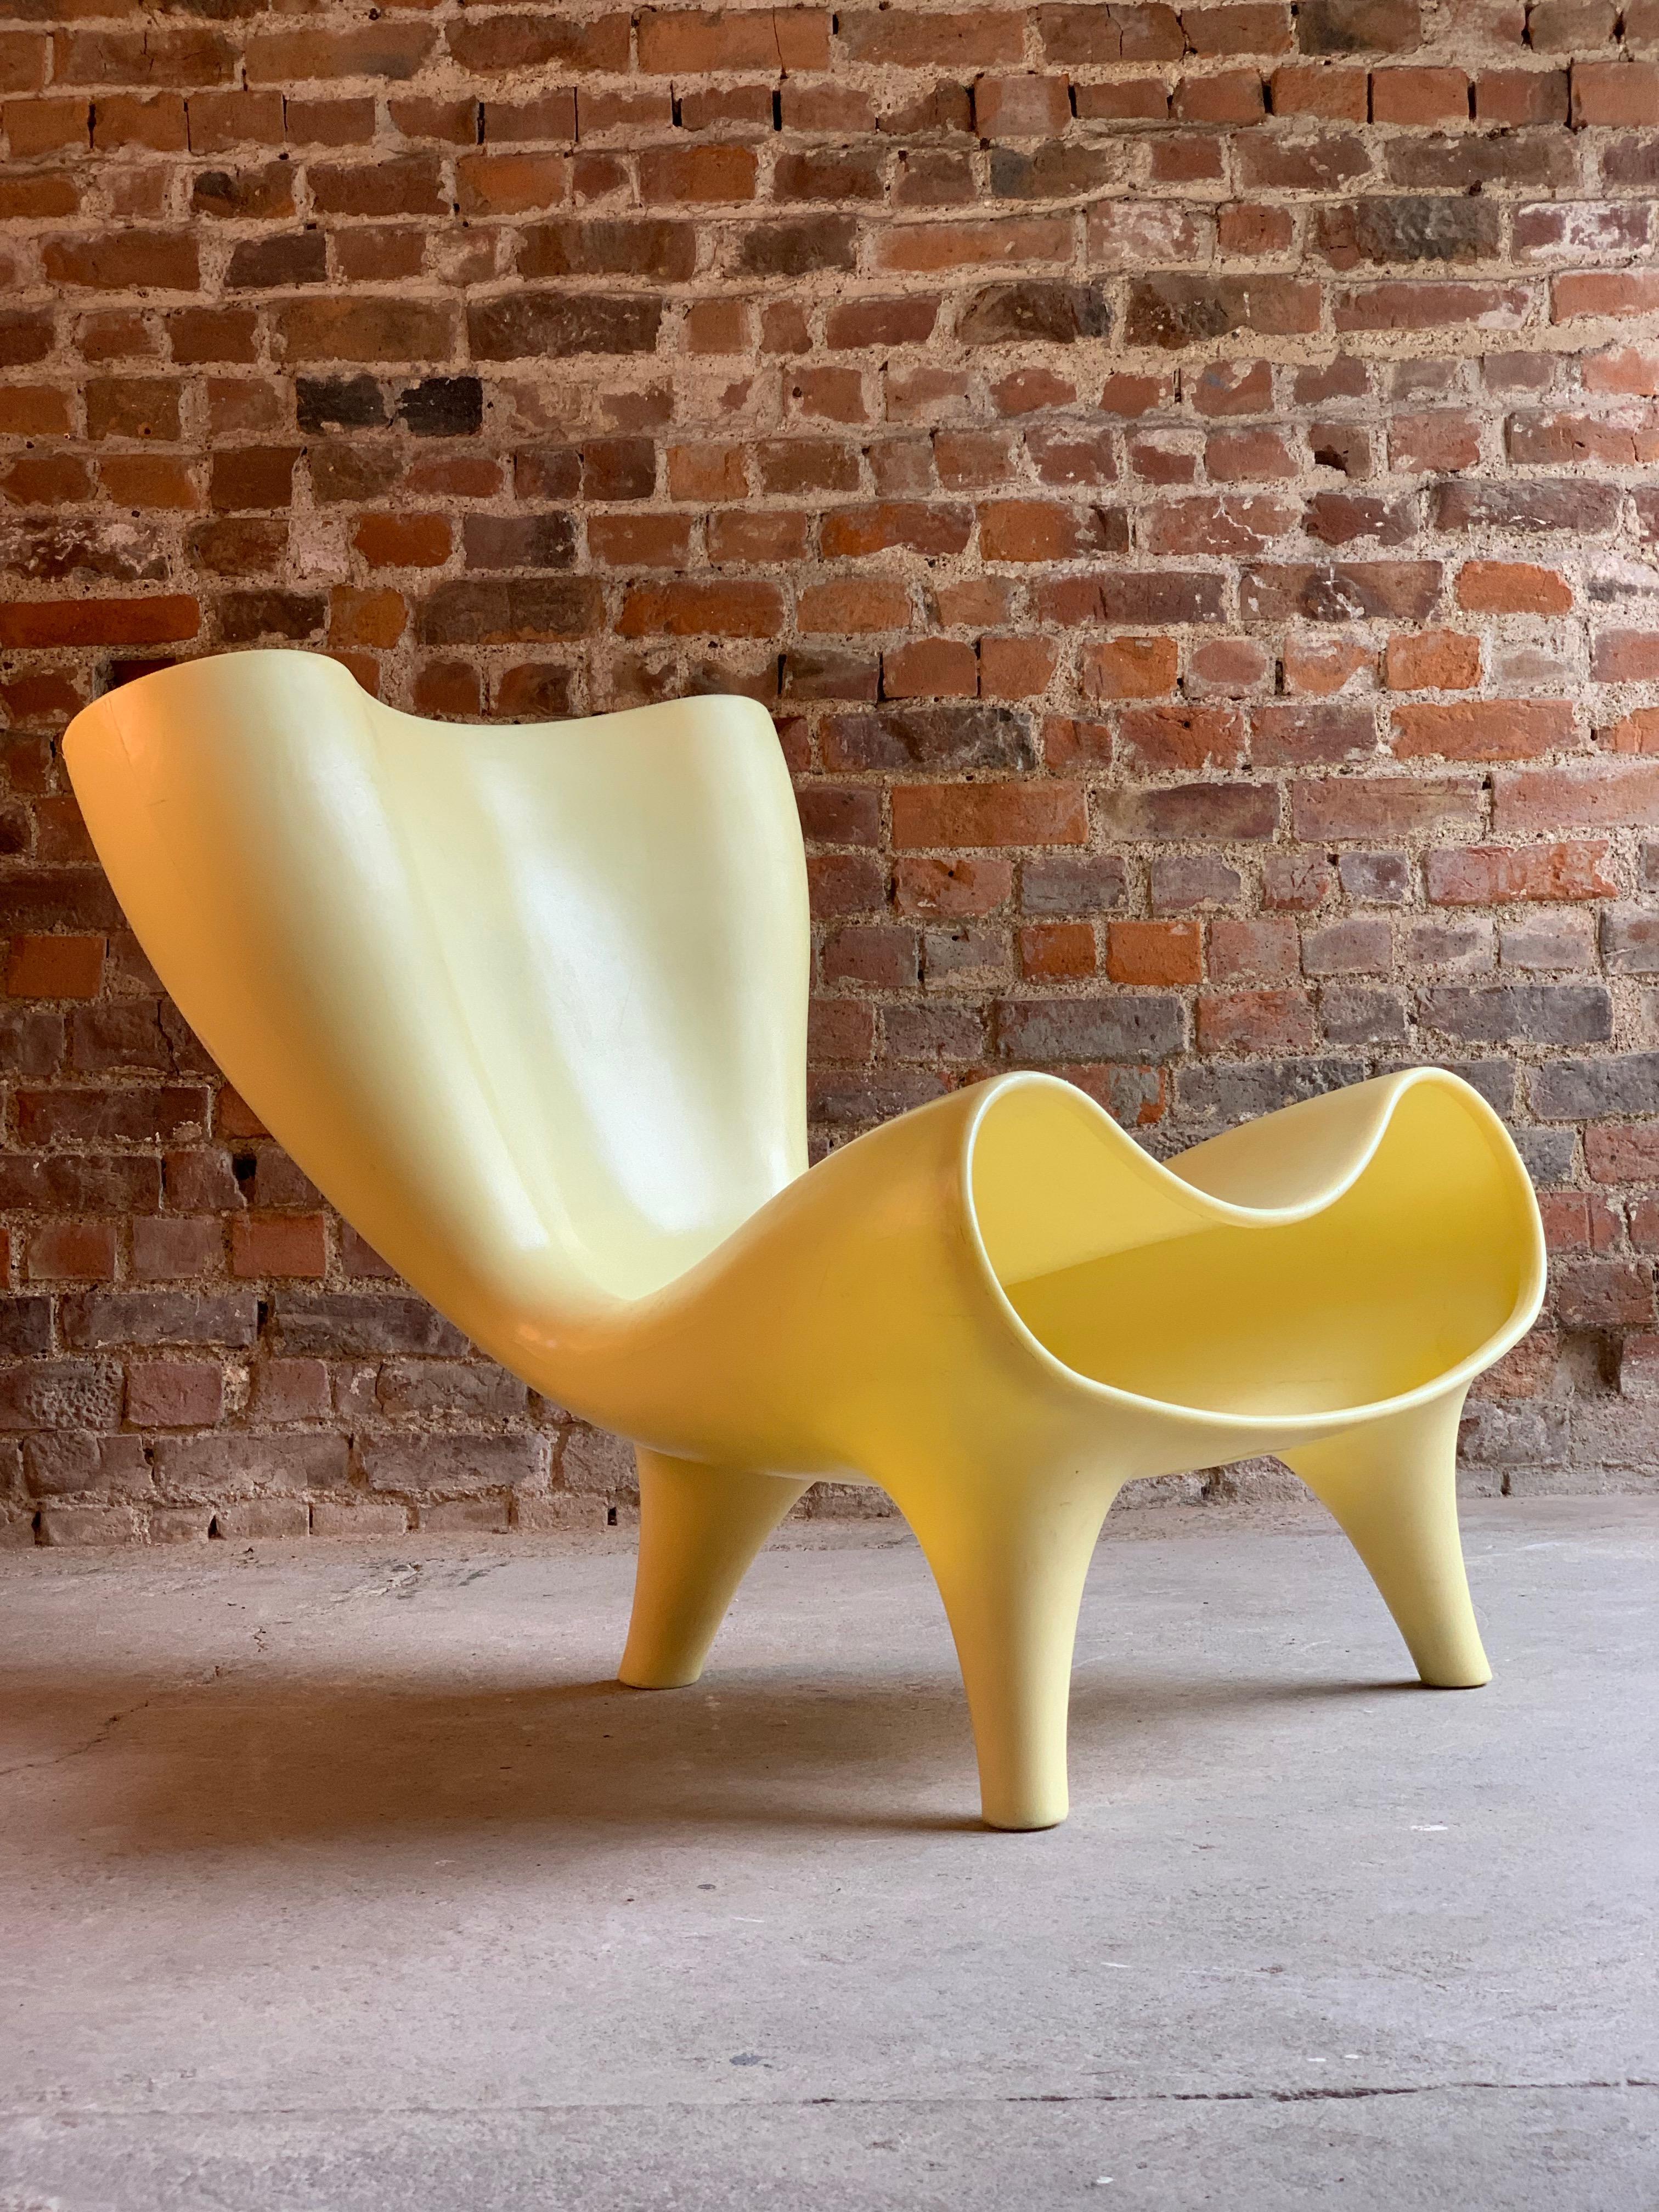 Marc Newson Orgone chair, circa 1993

Rare Orgone chair by Marc Newson, circa 1993 finished in ivory, the Orgone chair was designed in 1993 by Marc Newson. The original design comes from a series of limited edition aluminum furniture designed by